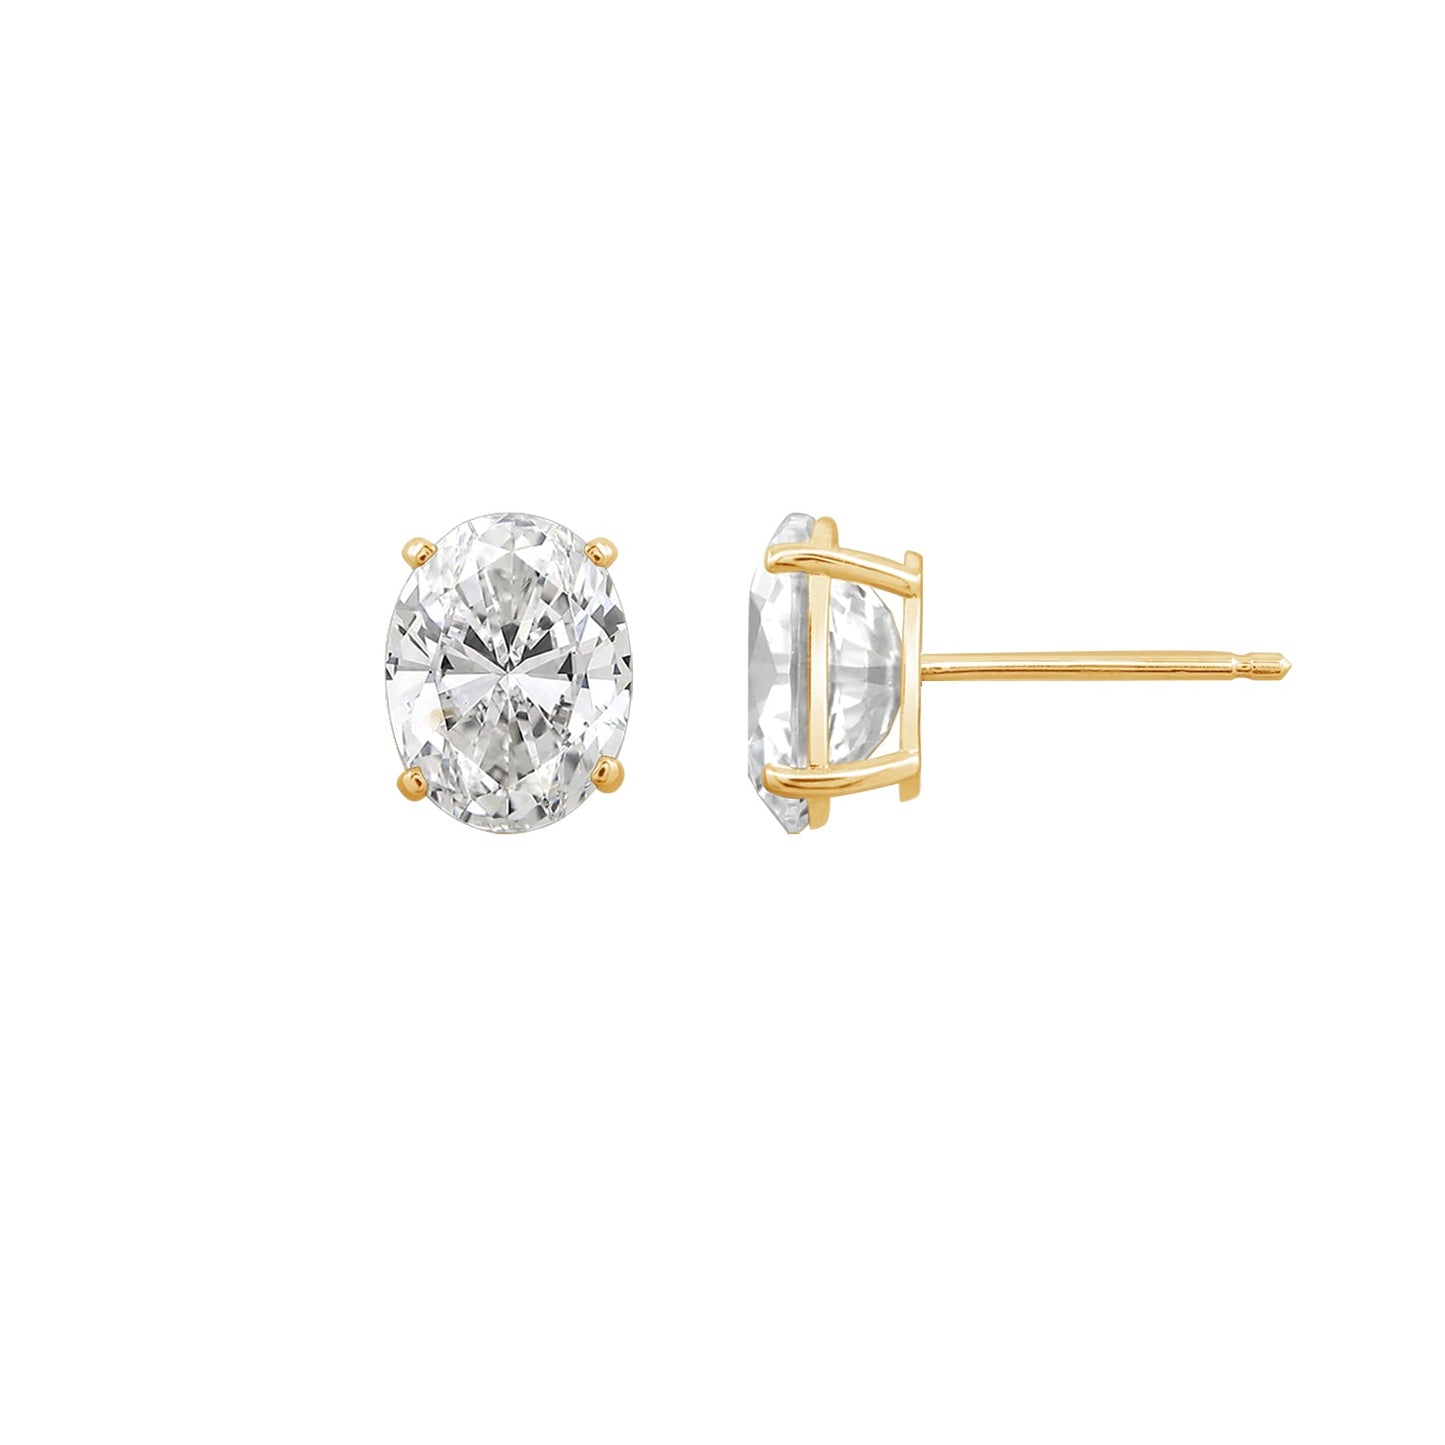 Gold Oval Solitaire Earrings